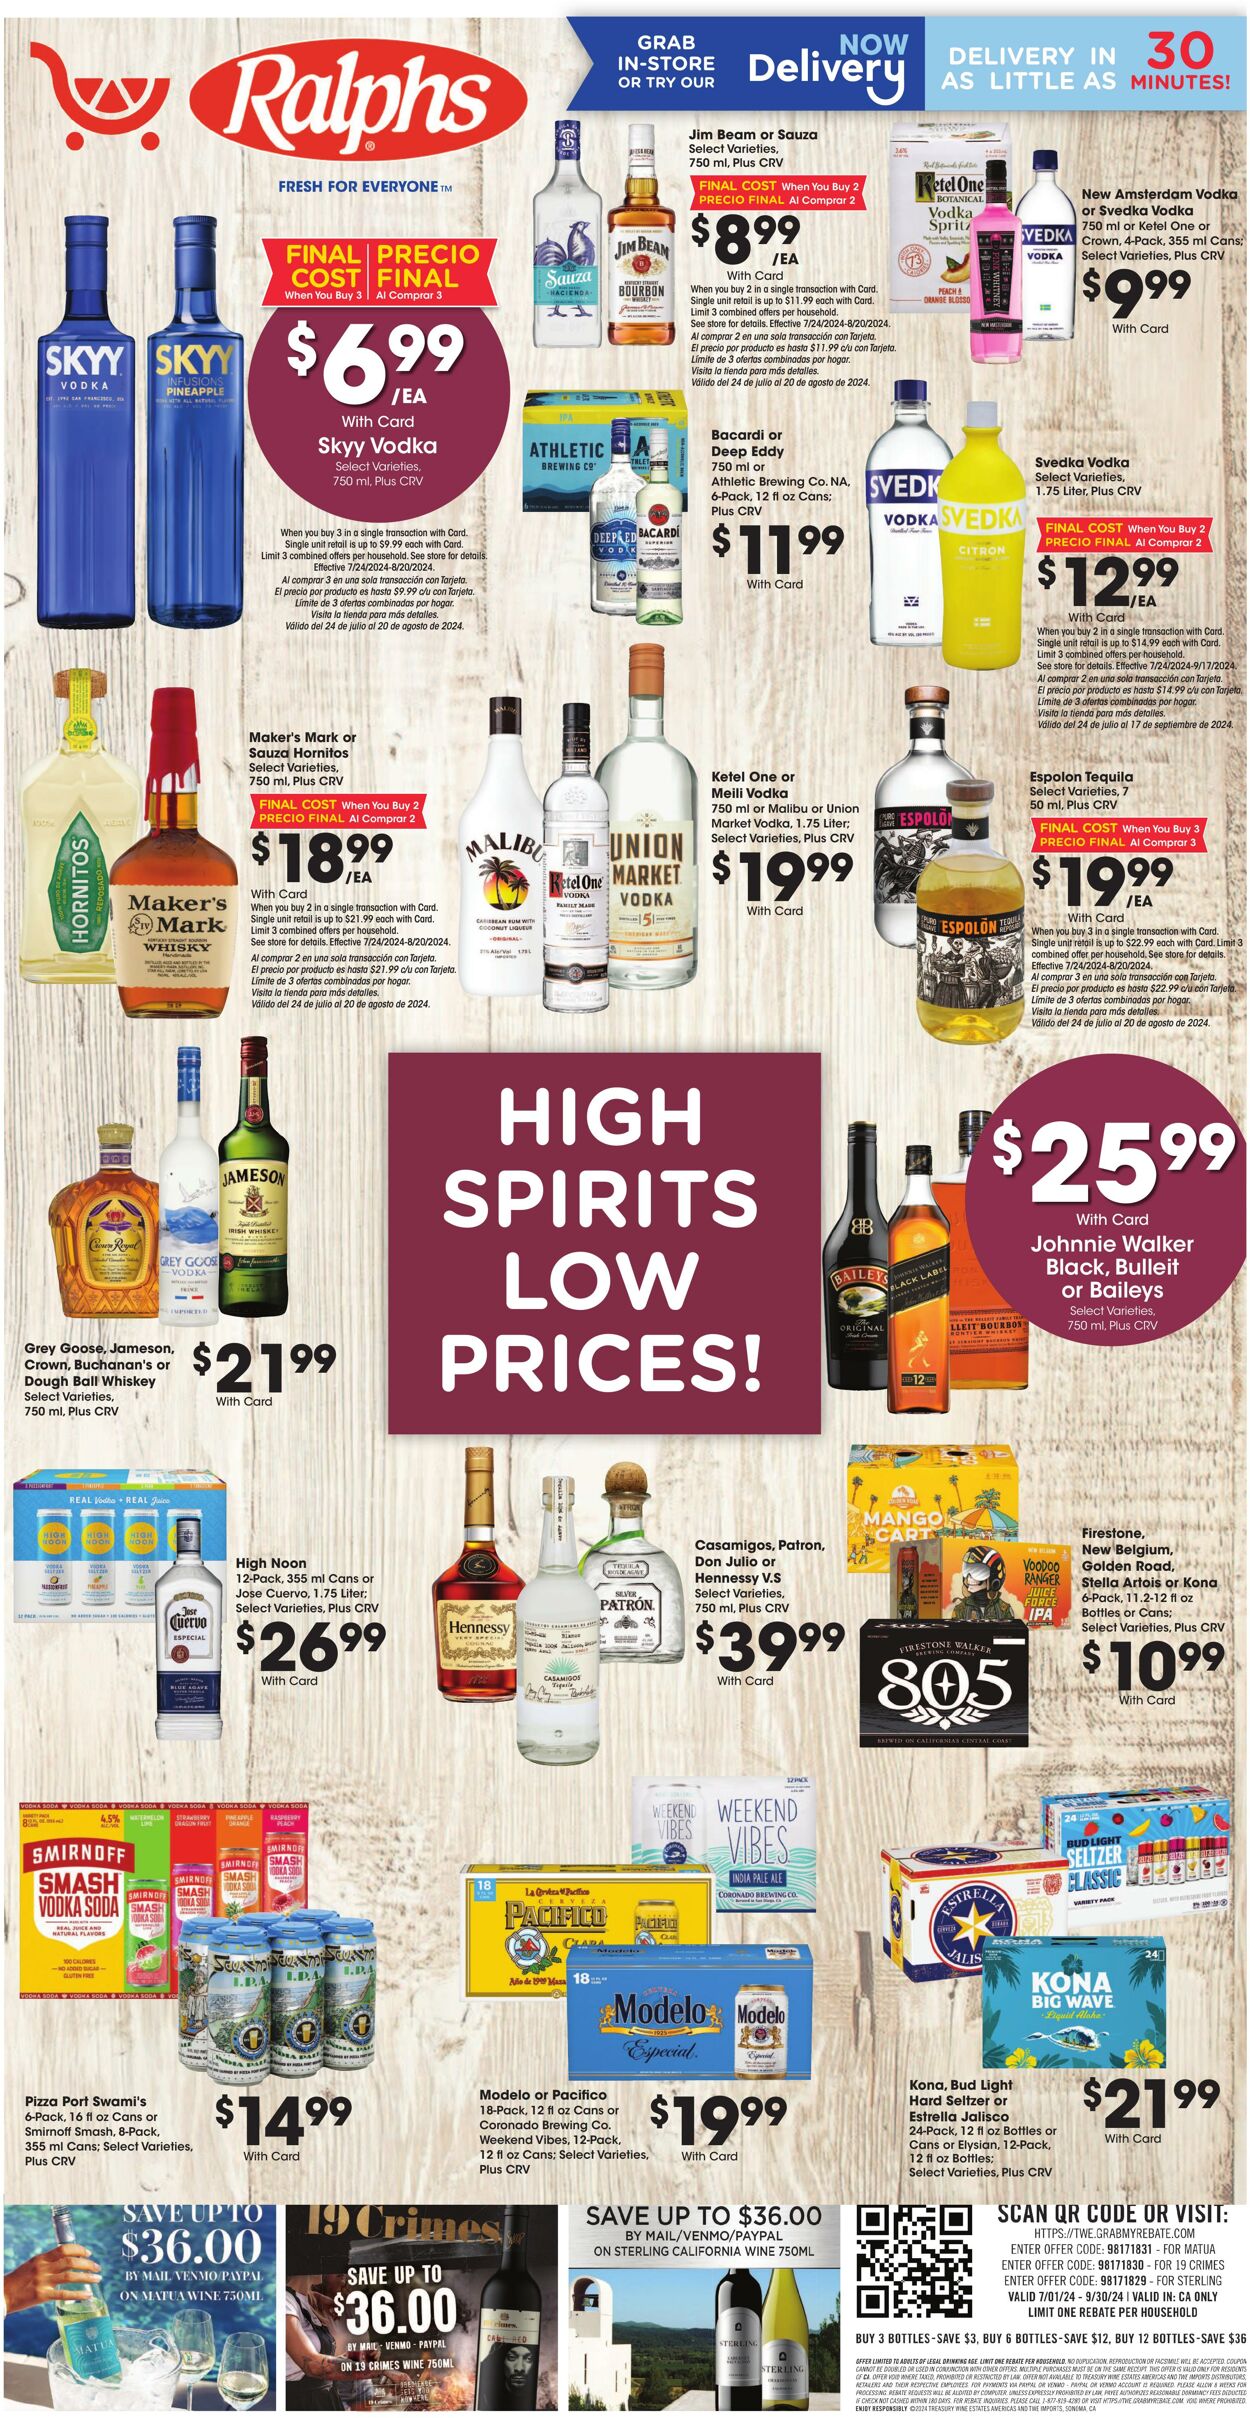 Ralphs Promotional weekly ads